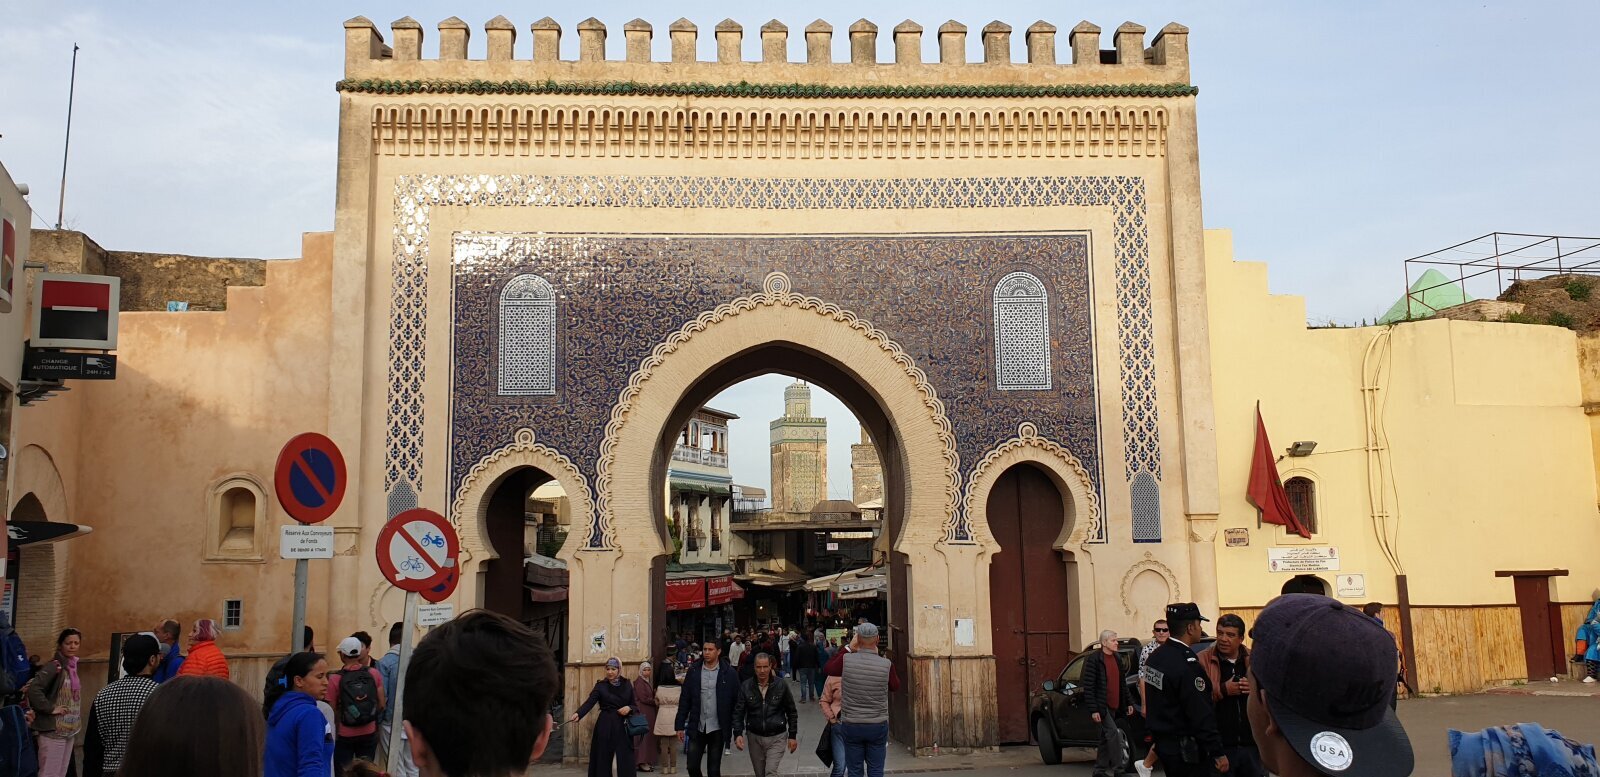 Which neighborhood of Fez is more convenient and safe for a tourist to stay in